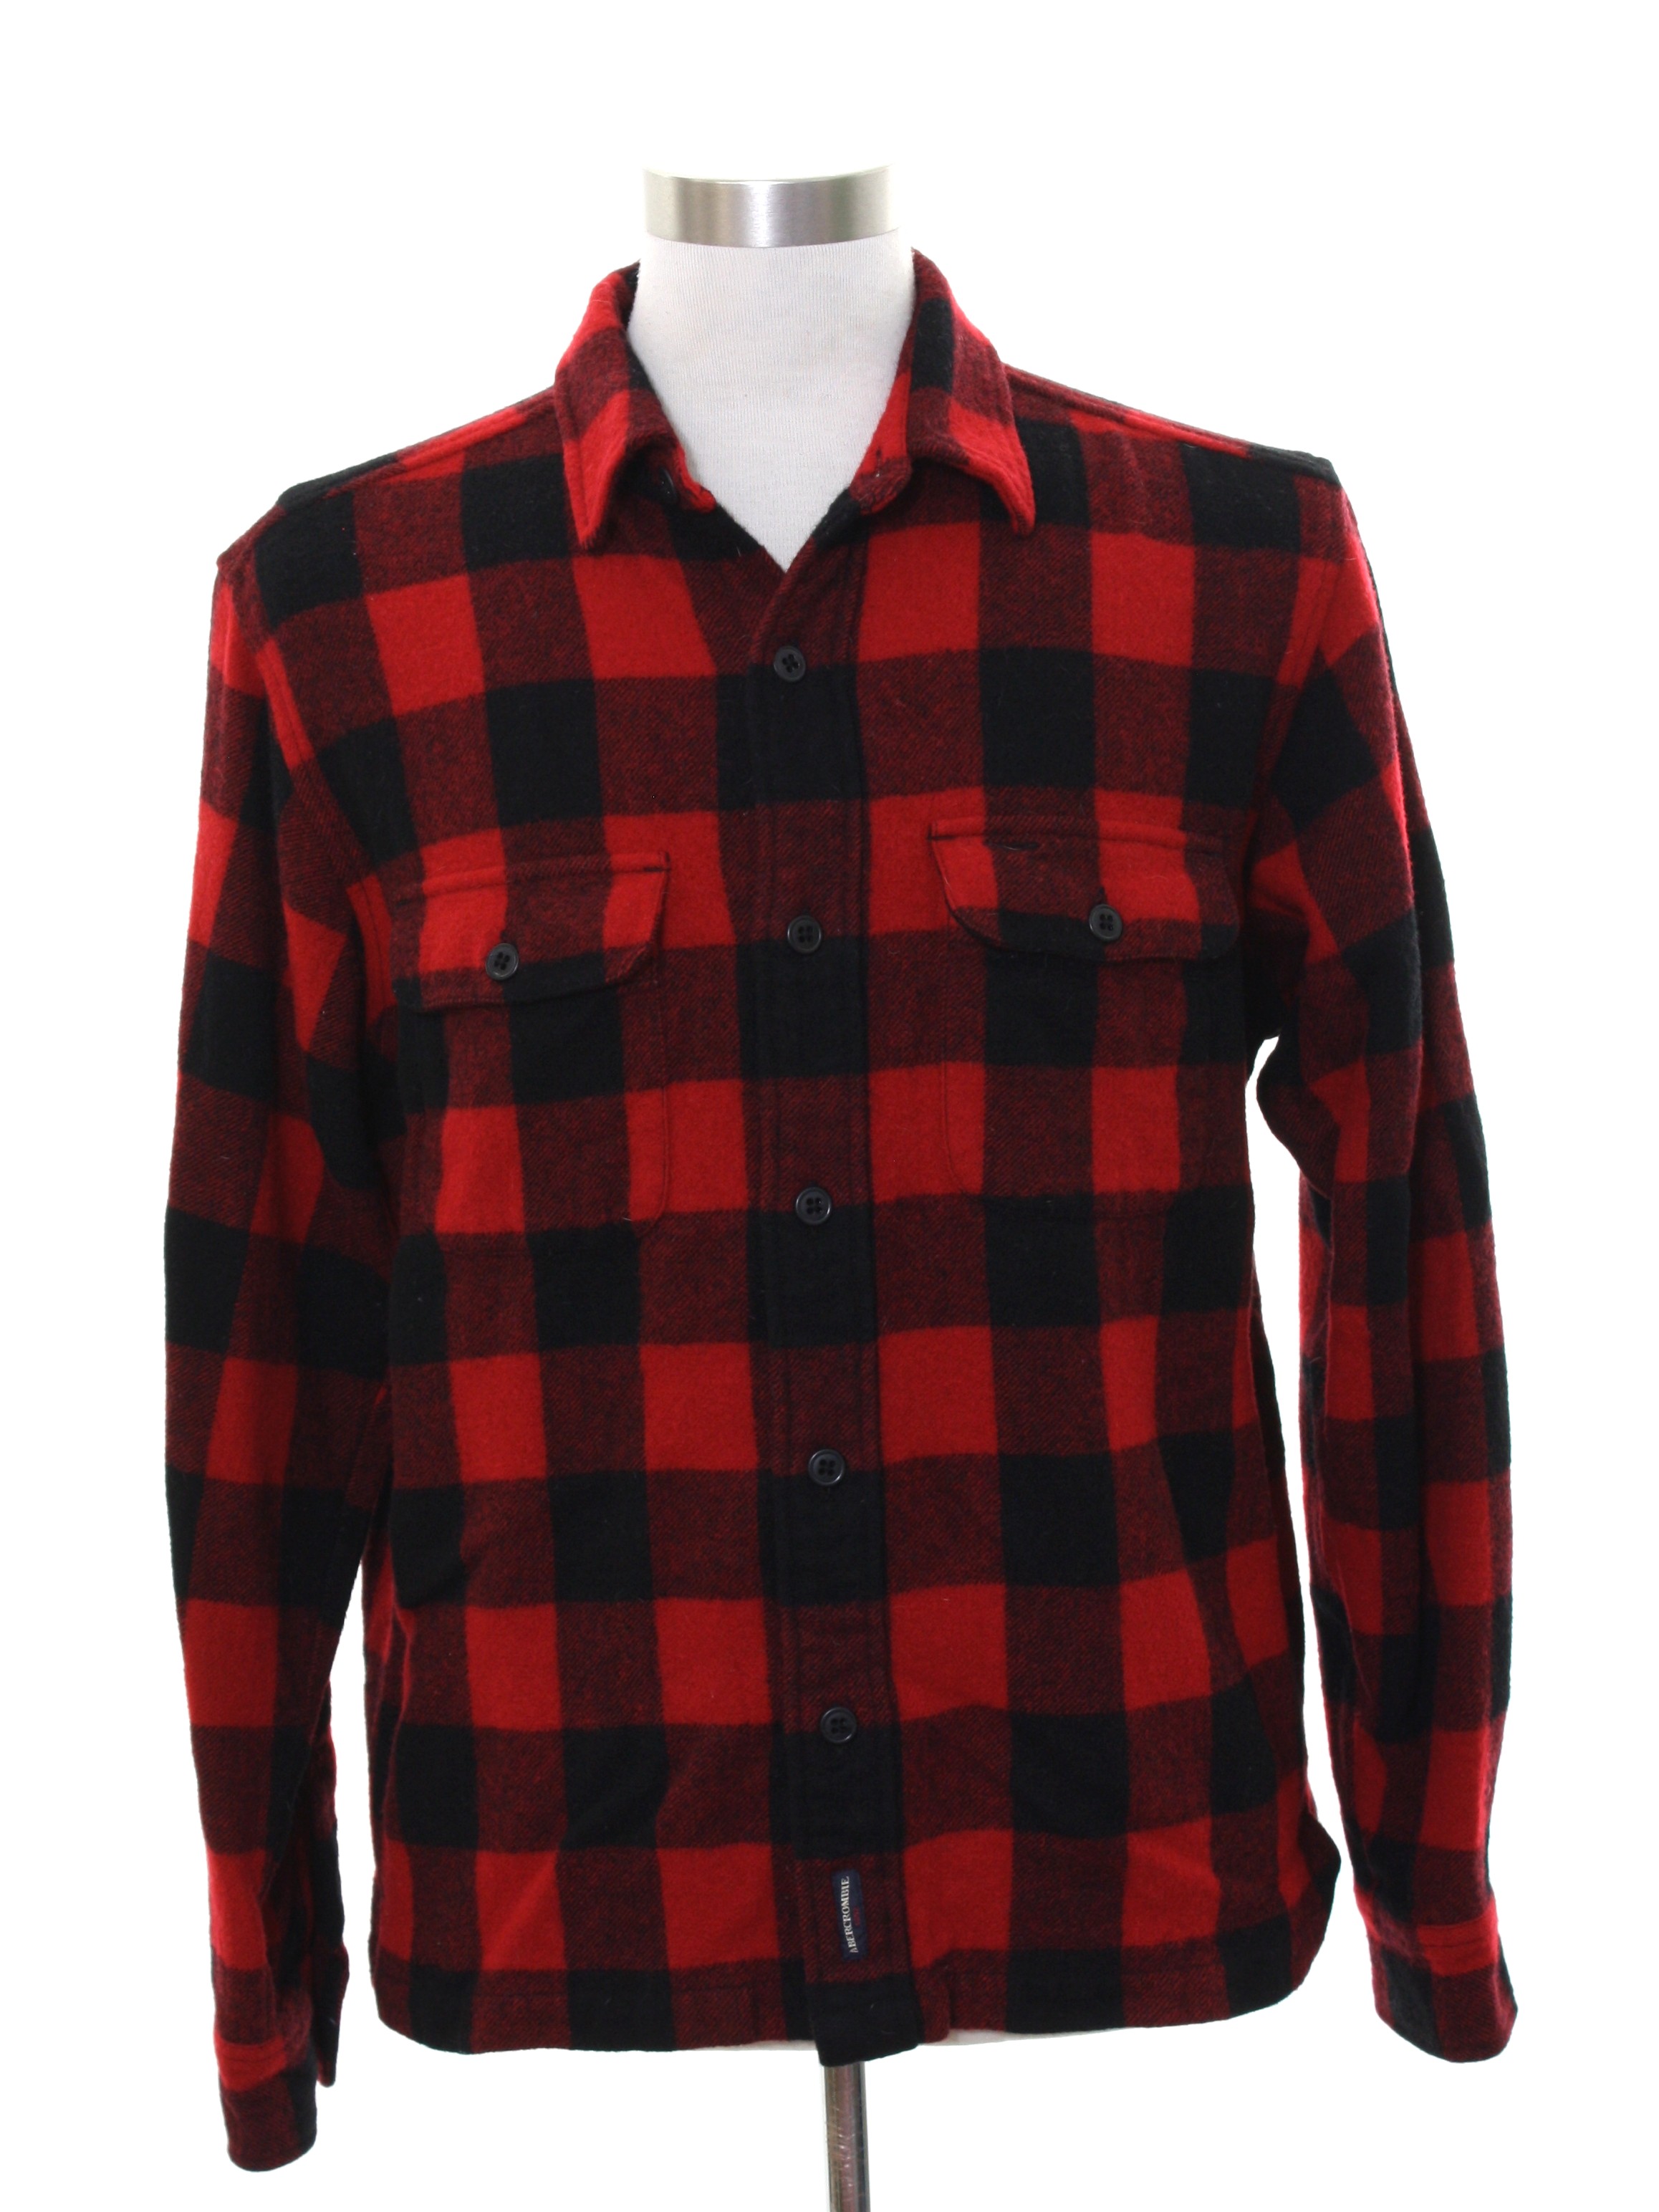 abercrombie fitch flannel shirt